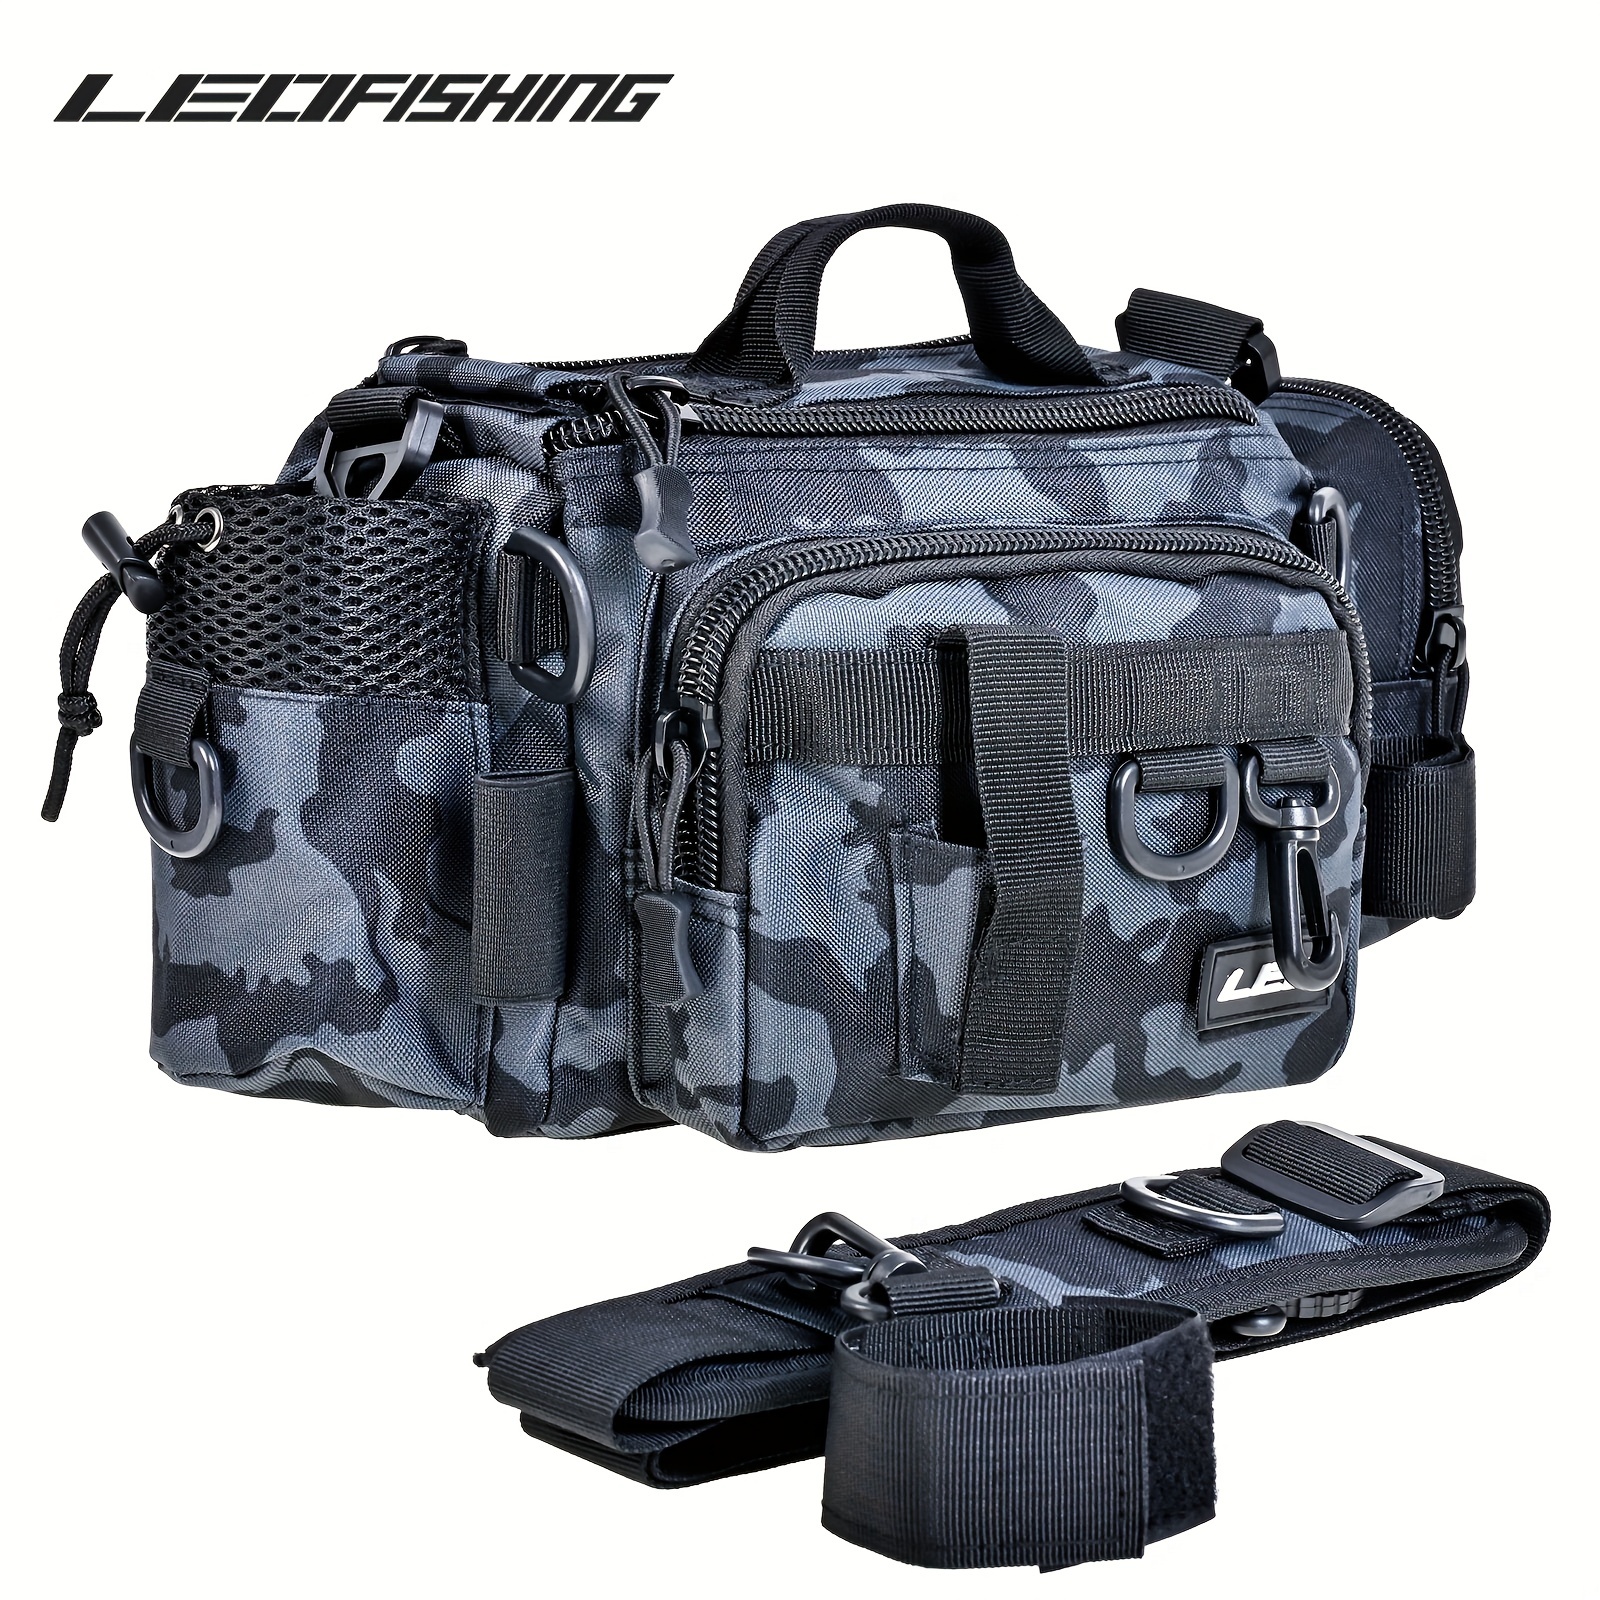 Fishing Tackle Bags Fishing Bags For Saltwater Or Fresh Water Fishing Water  Resistants Material Padded Shoulder Strap Fishing Gear Storage